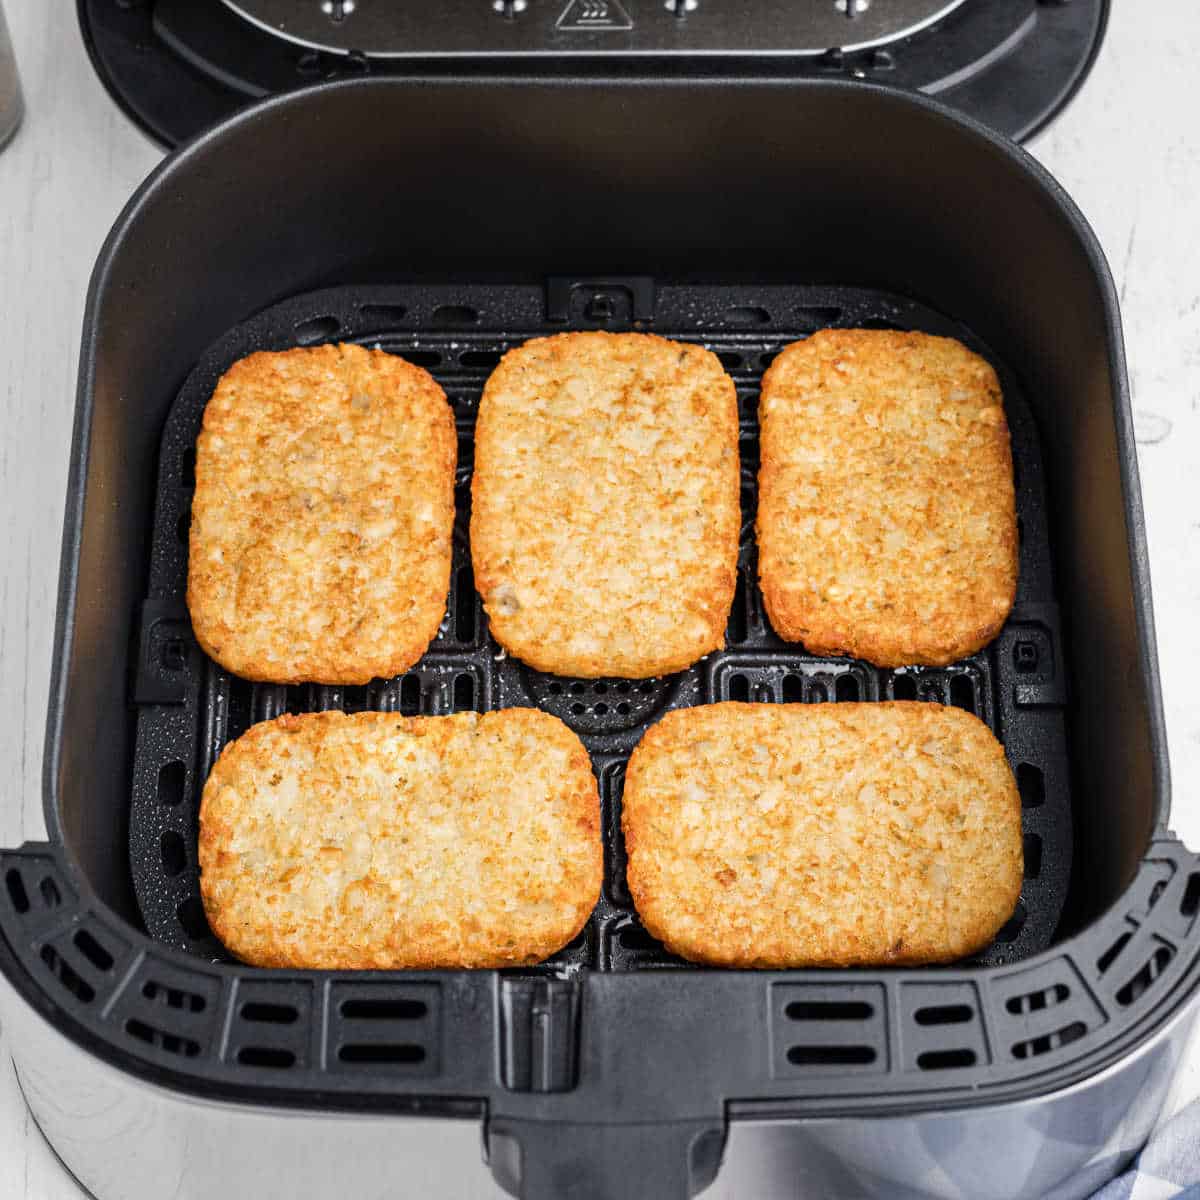 https://thecaglediaries.com/wp-content/uploads/2021/07/Air-Fryer-Hash-Browns-Recipe-Card.jpg